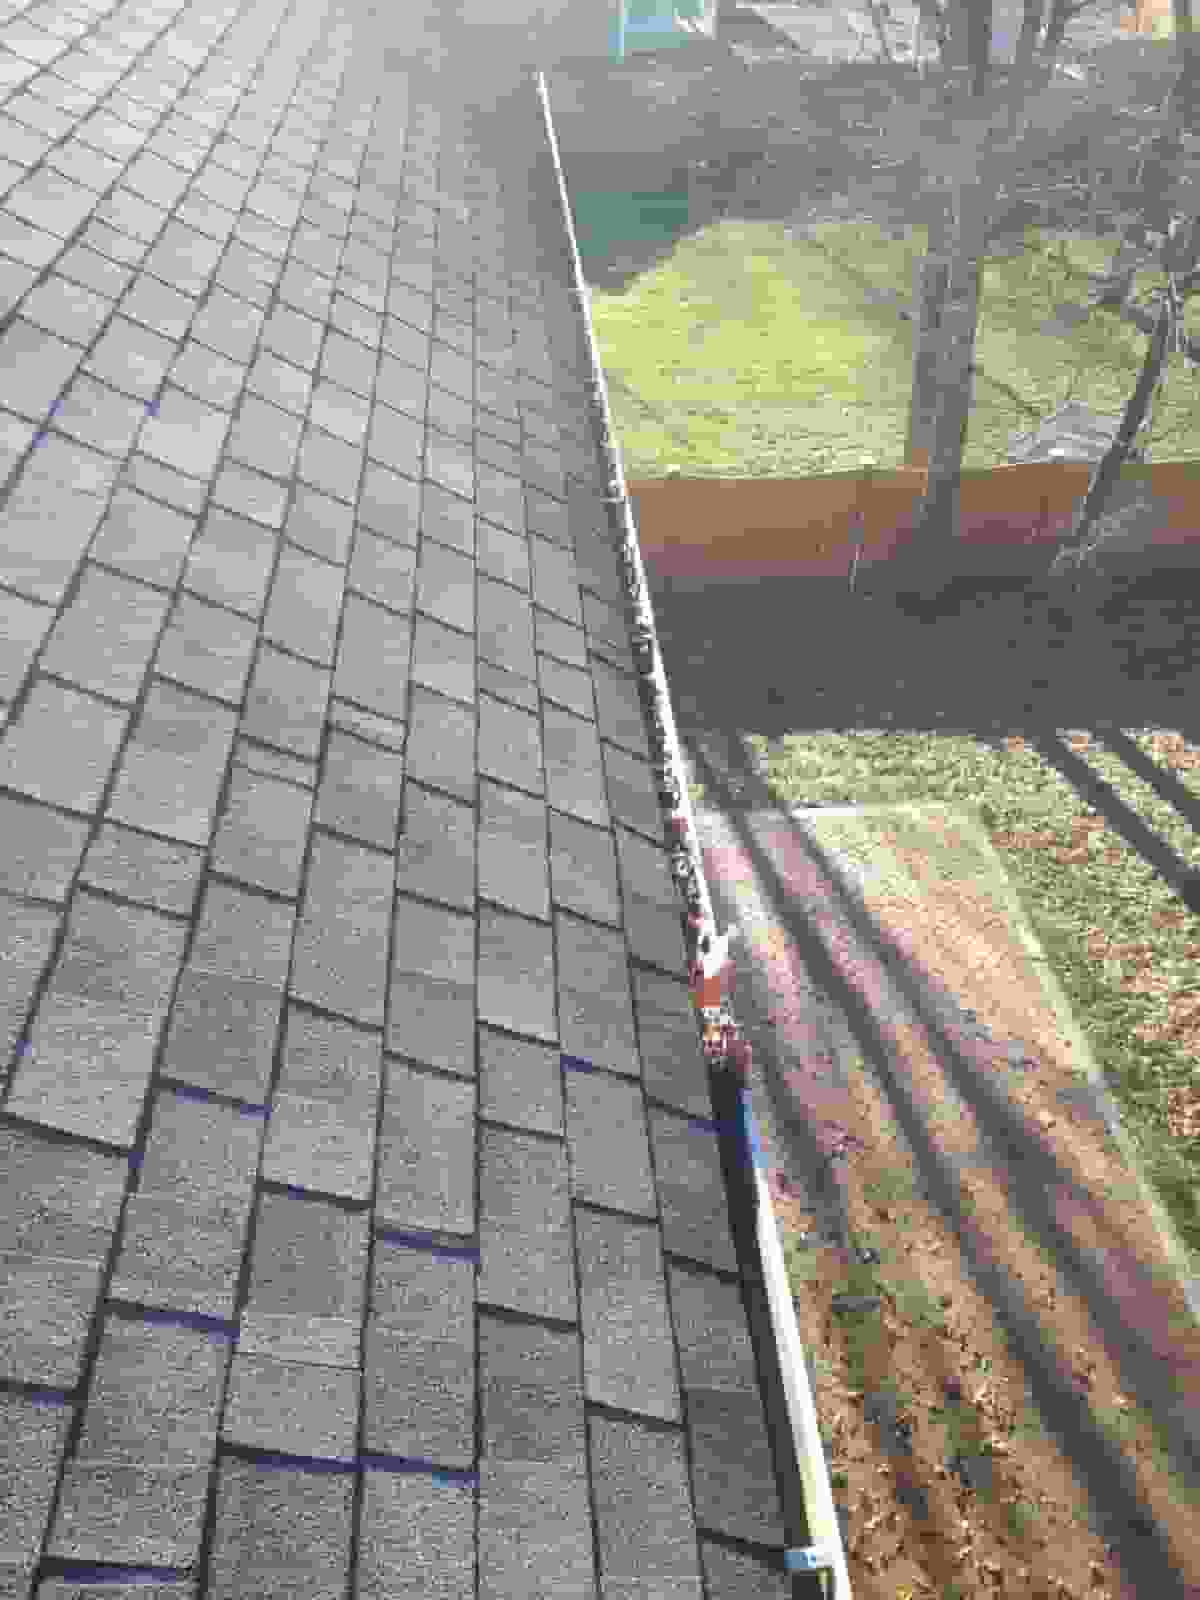 commercial gutter cleaning prices